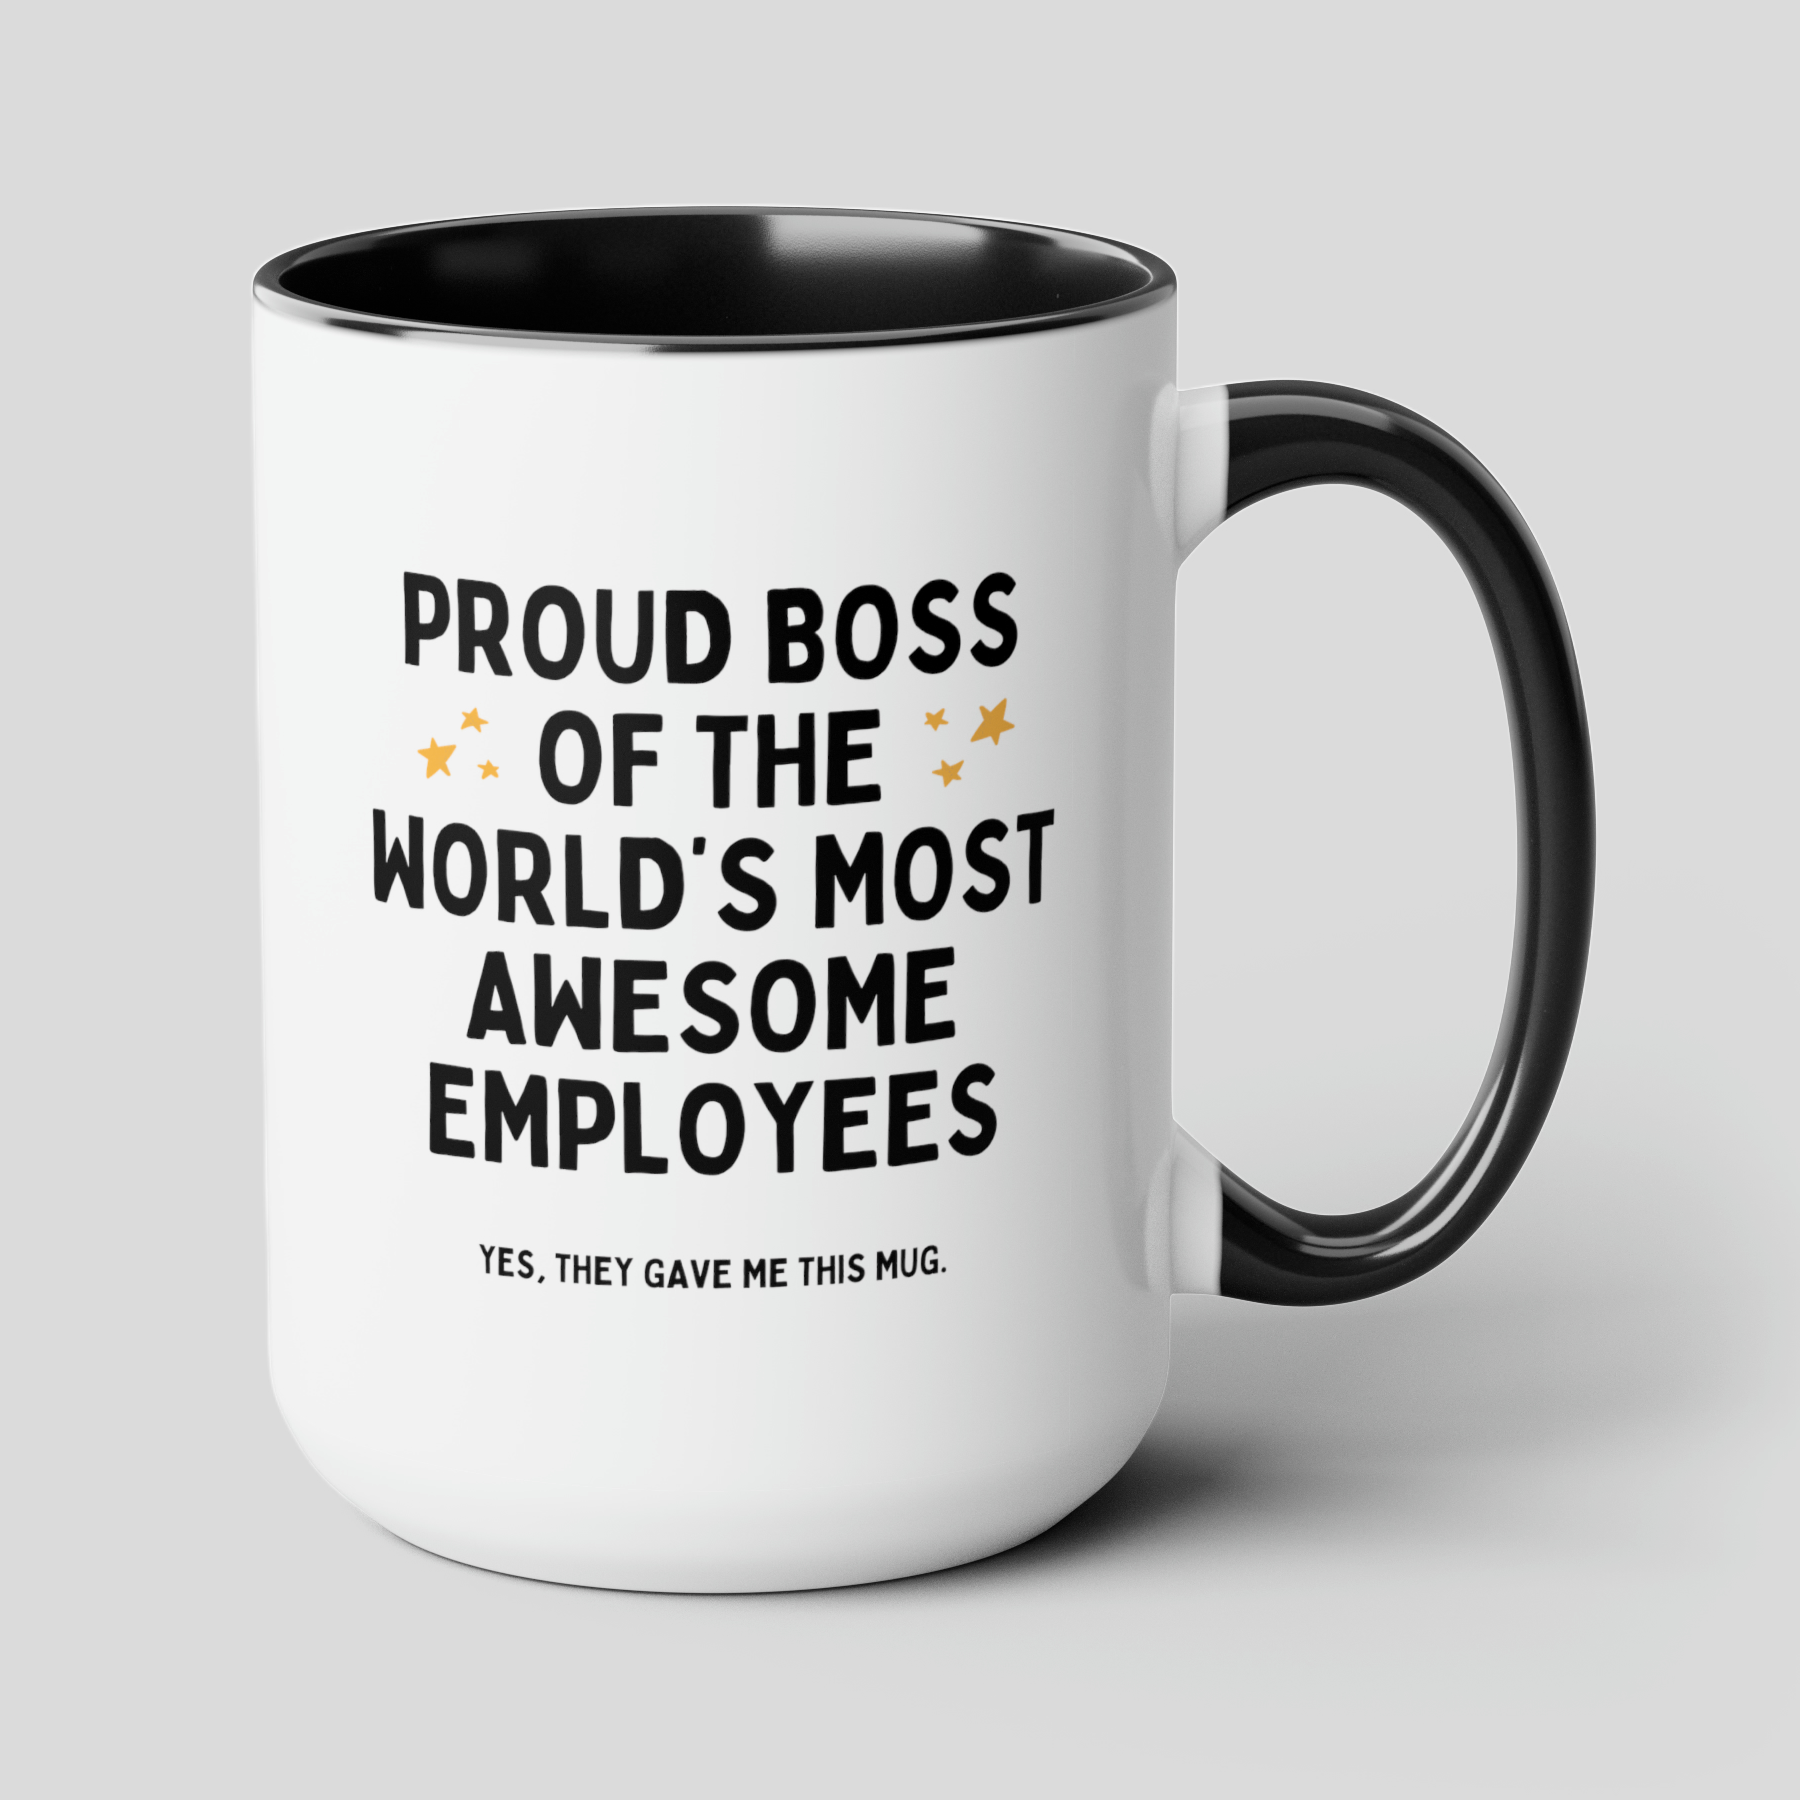 Proud Boss Of The World's Most Awesome Employees 15oz white with black accent funny large coffee mug gift for  secret santa coworker supervisor appreciation waveywares wavey wares wavywares wavy wares cover